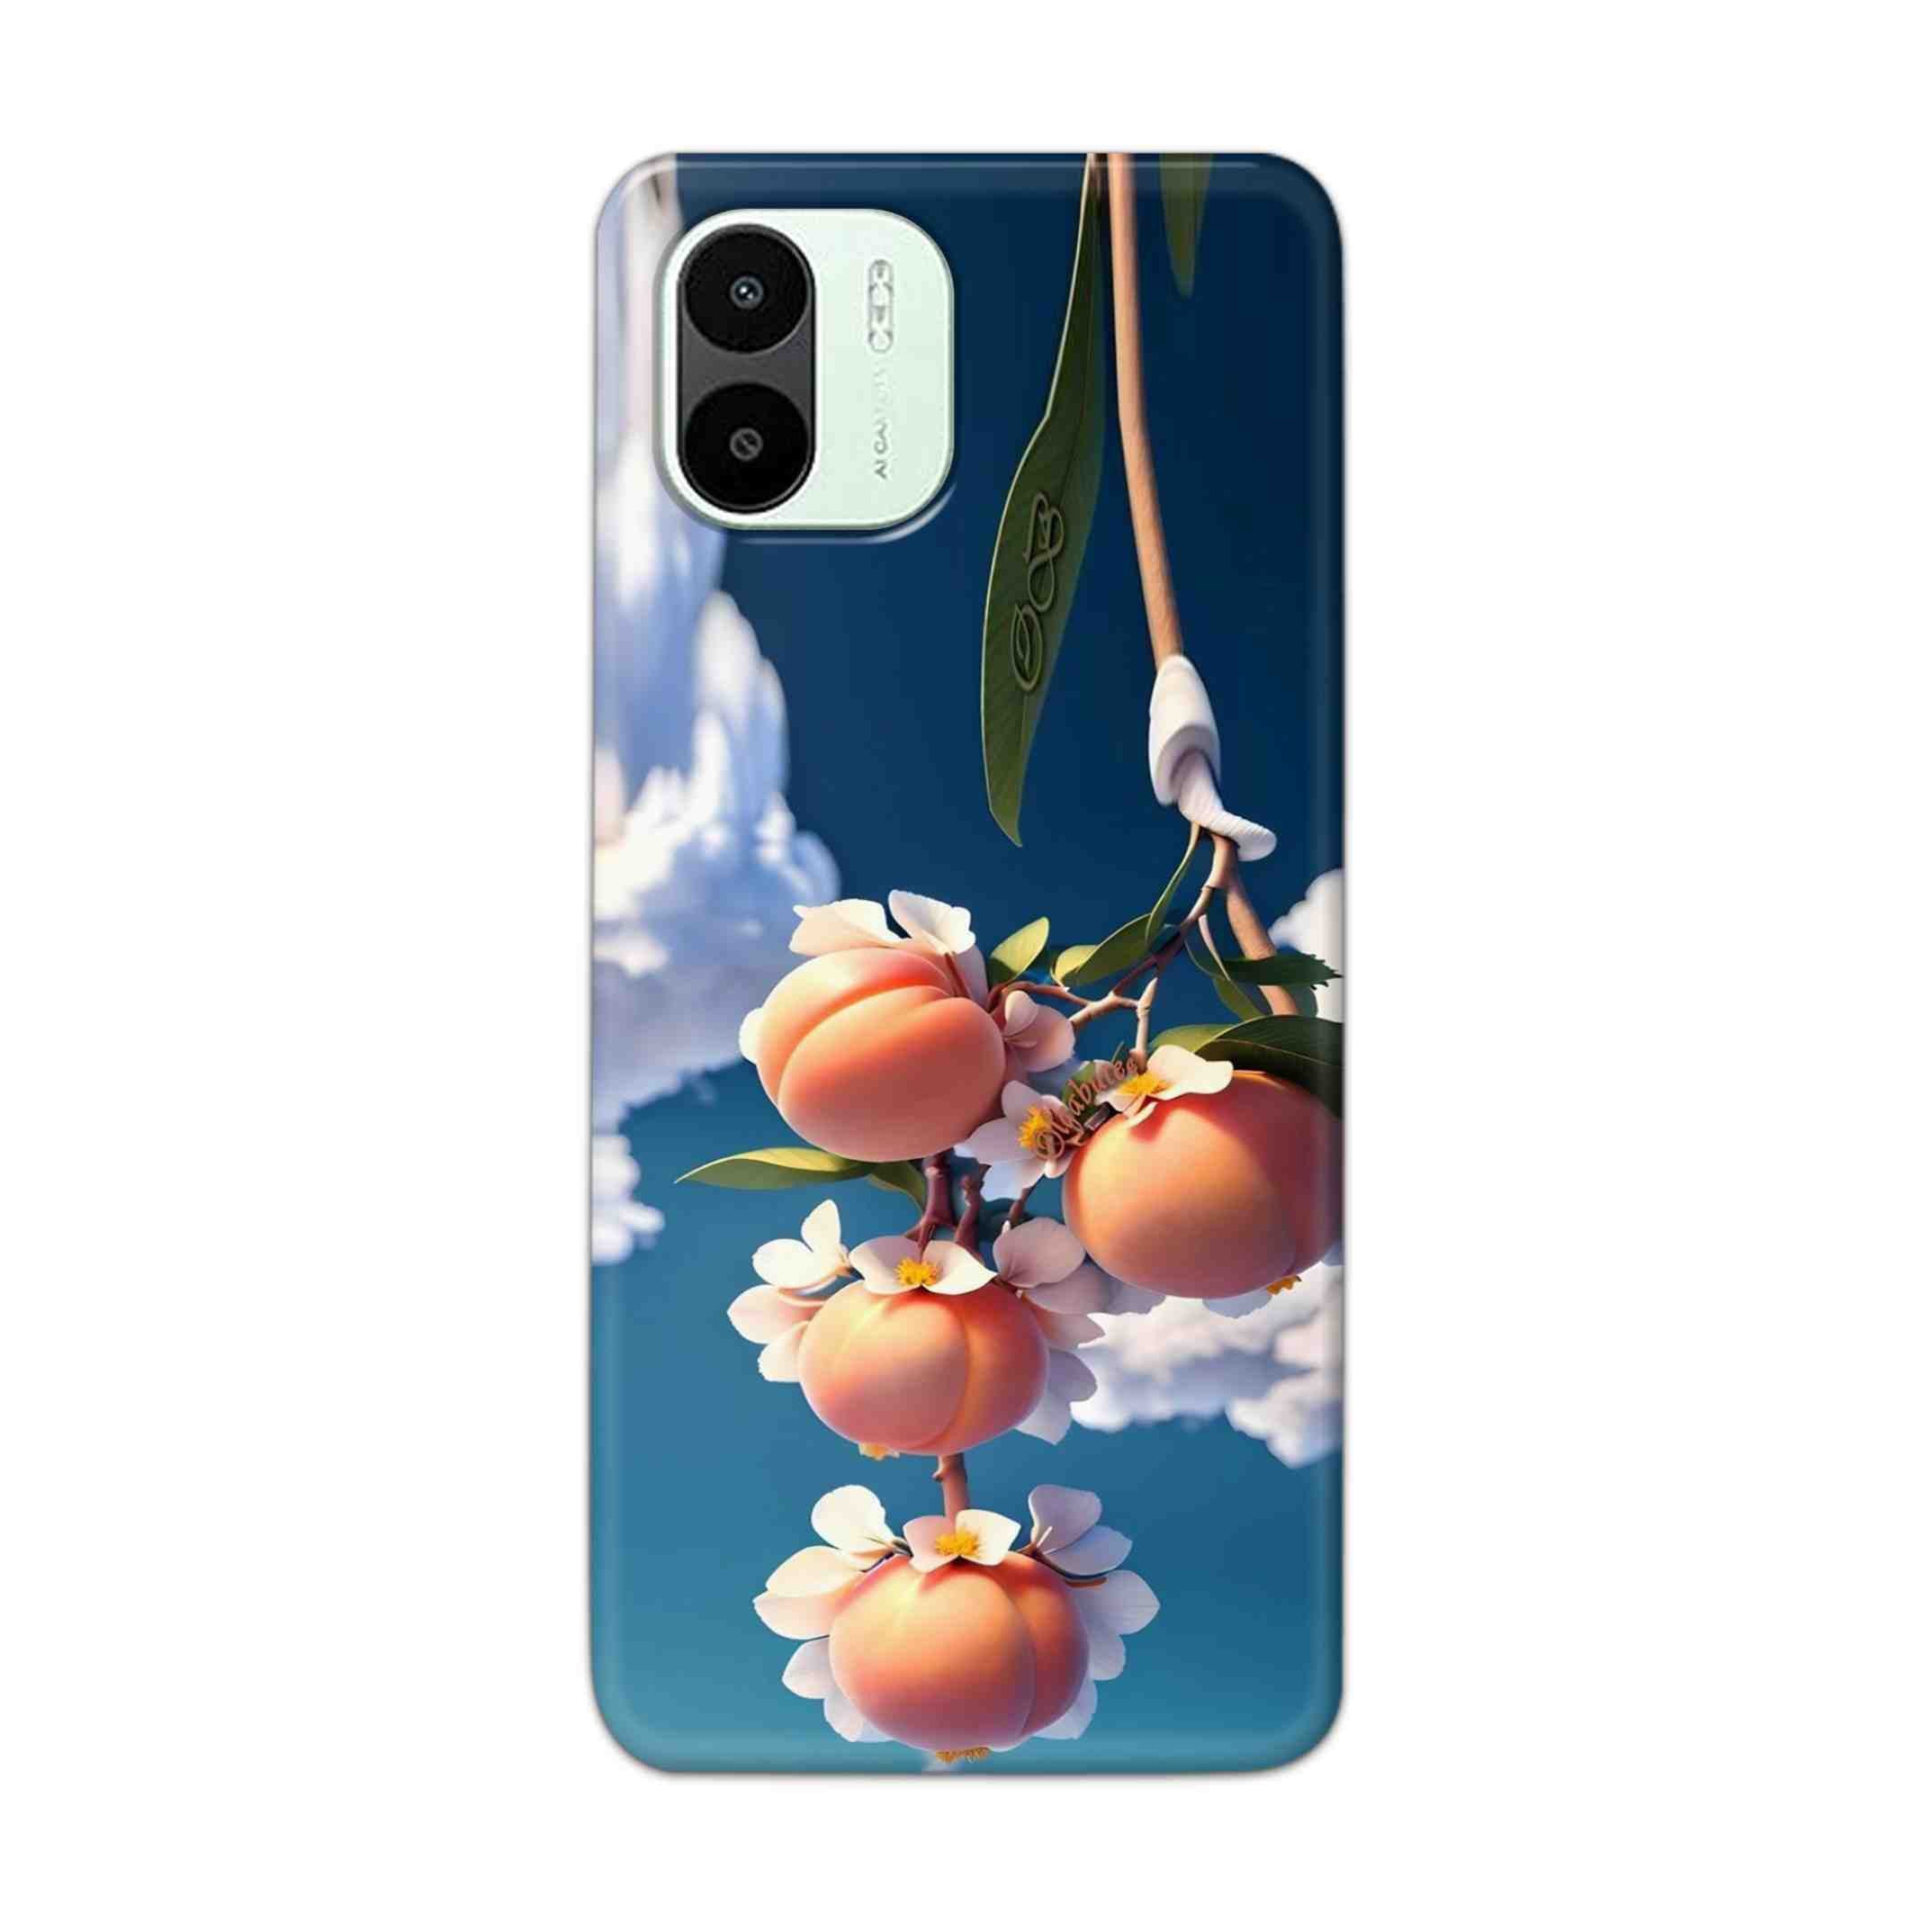 Buy Fruit Hard Back Mobile Phone Case Cover For Xiaomi Redmi A1 5G Online